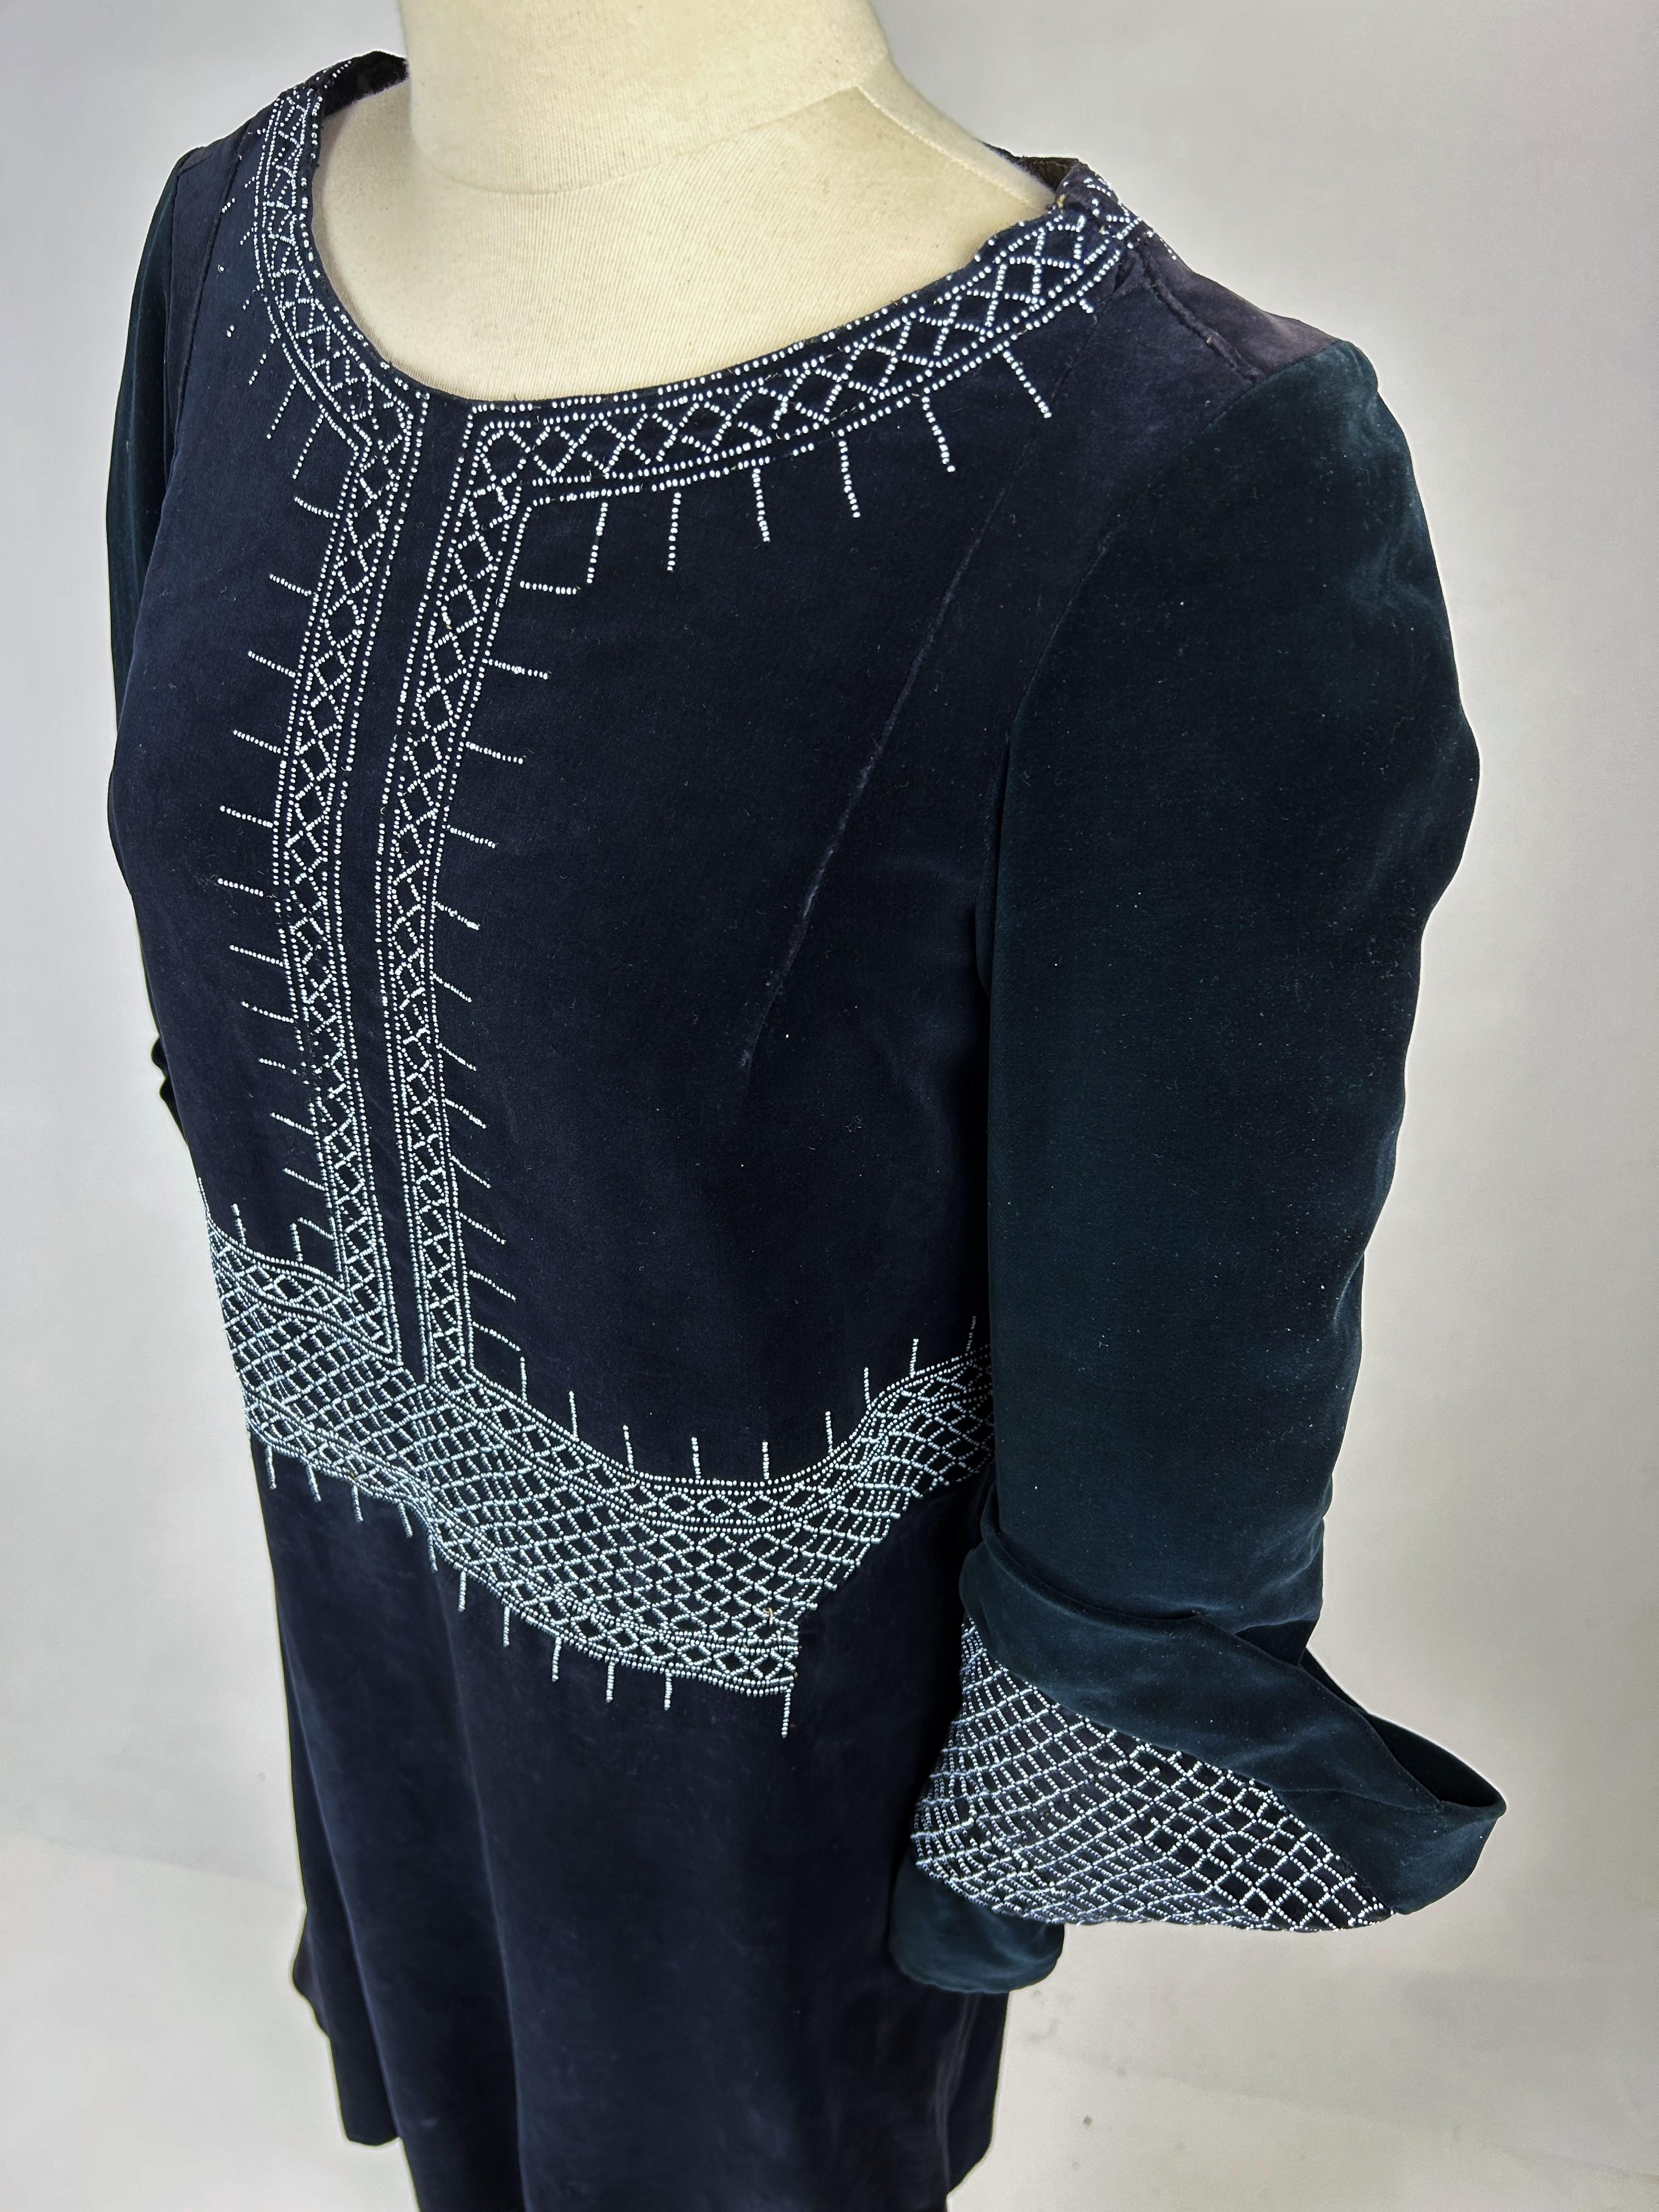 A Navy Velvet Sac Dress with glass beads embroideries - France Circa 1925-1930 For Sale 5